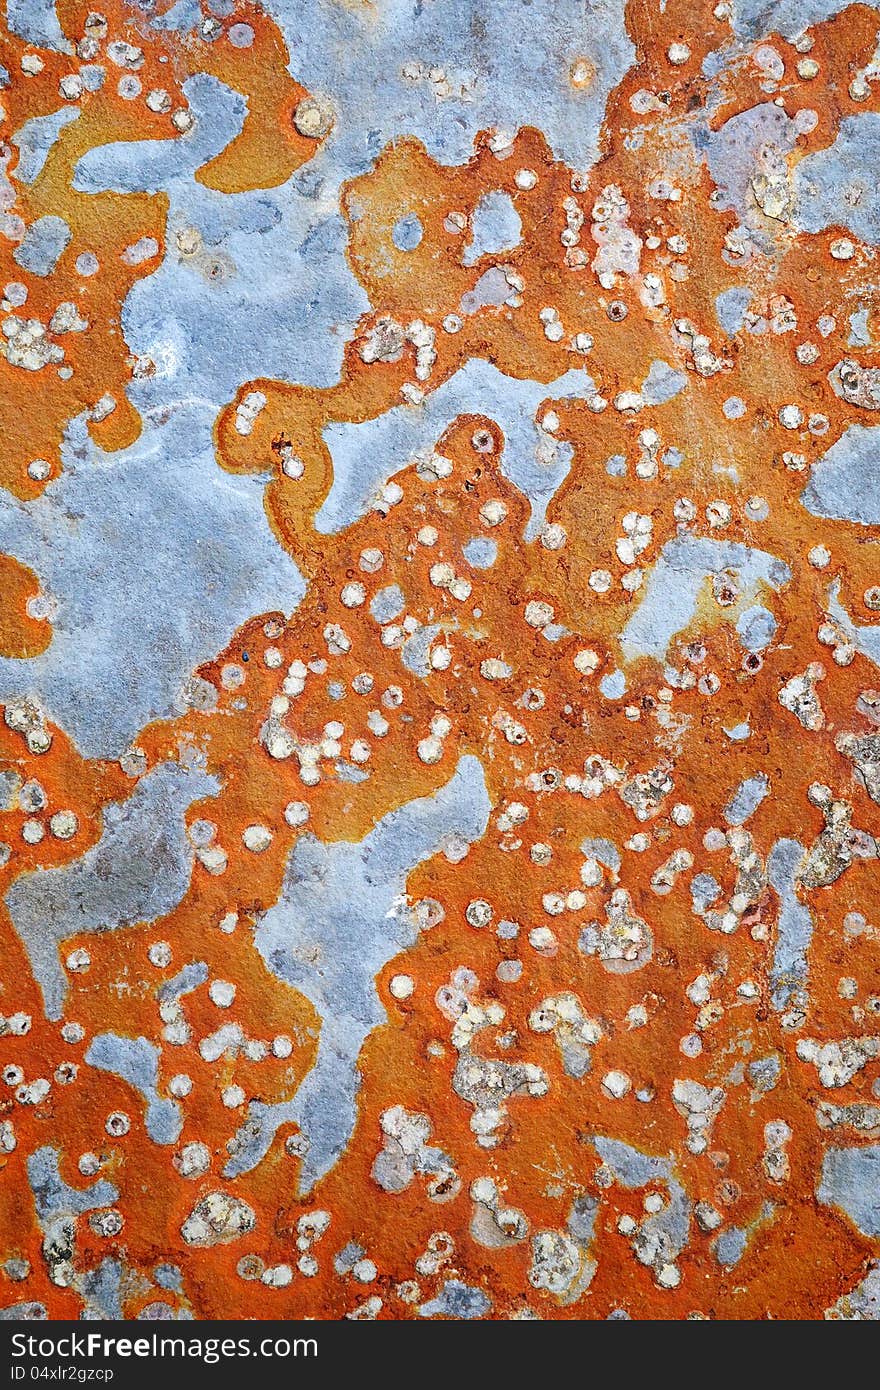 Orange algae and lichen composite covering the rough surface of a stone or rock creating an interesting abstract pattern. Orange algae and lichen composite covering the rough surface of a stone or rock creating an interesting abstract pattern